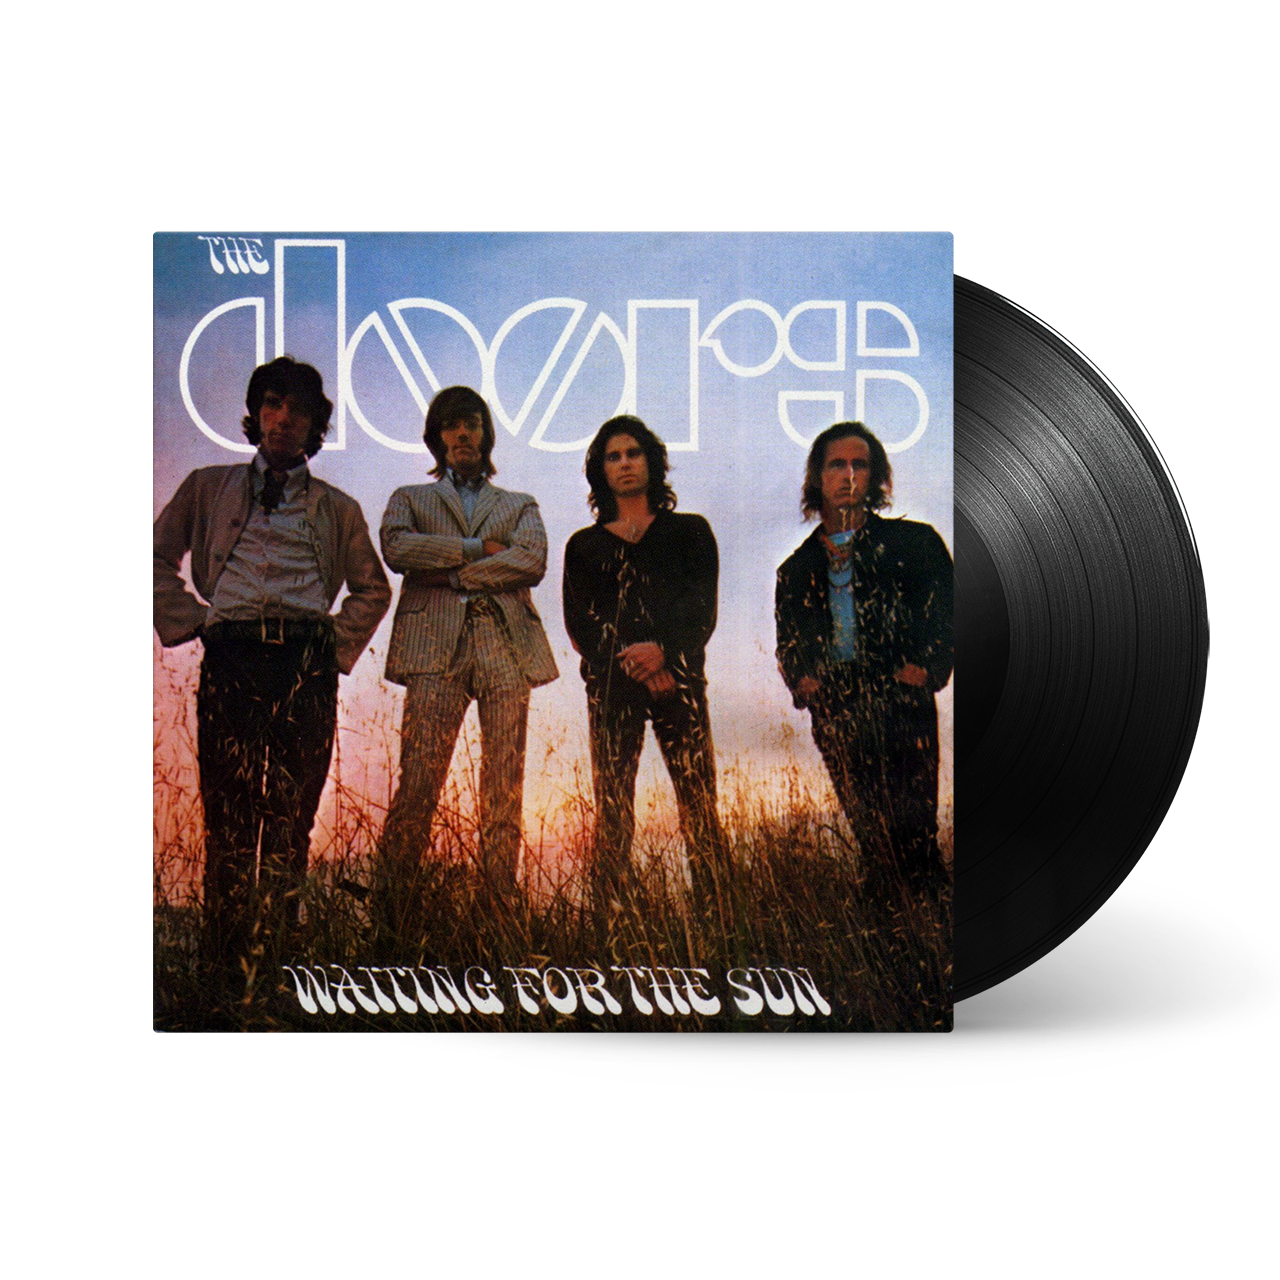 The Doors - Waiting for the Sun (Remastered): Vinyl LP